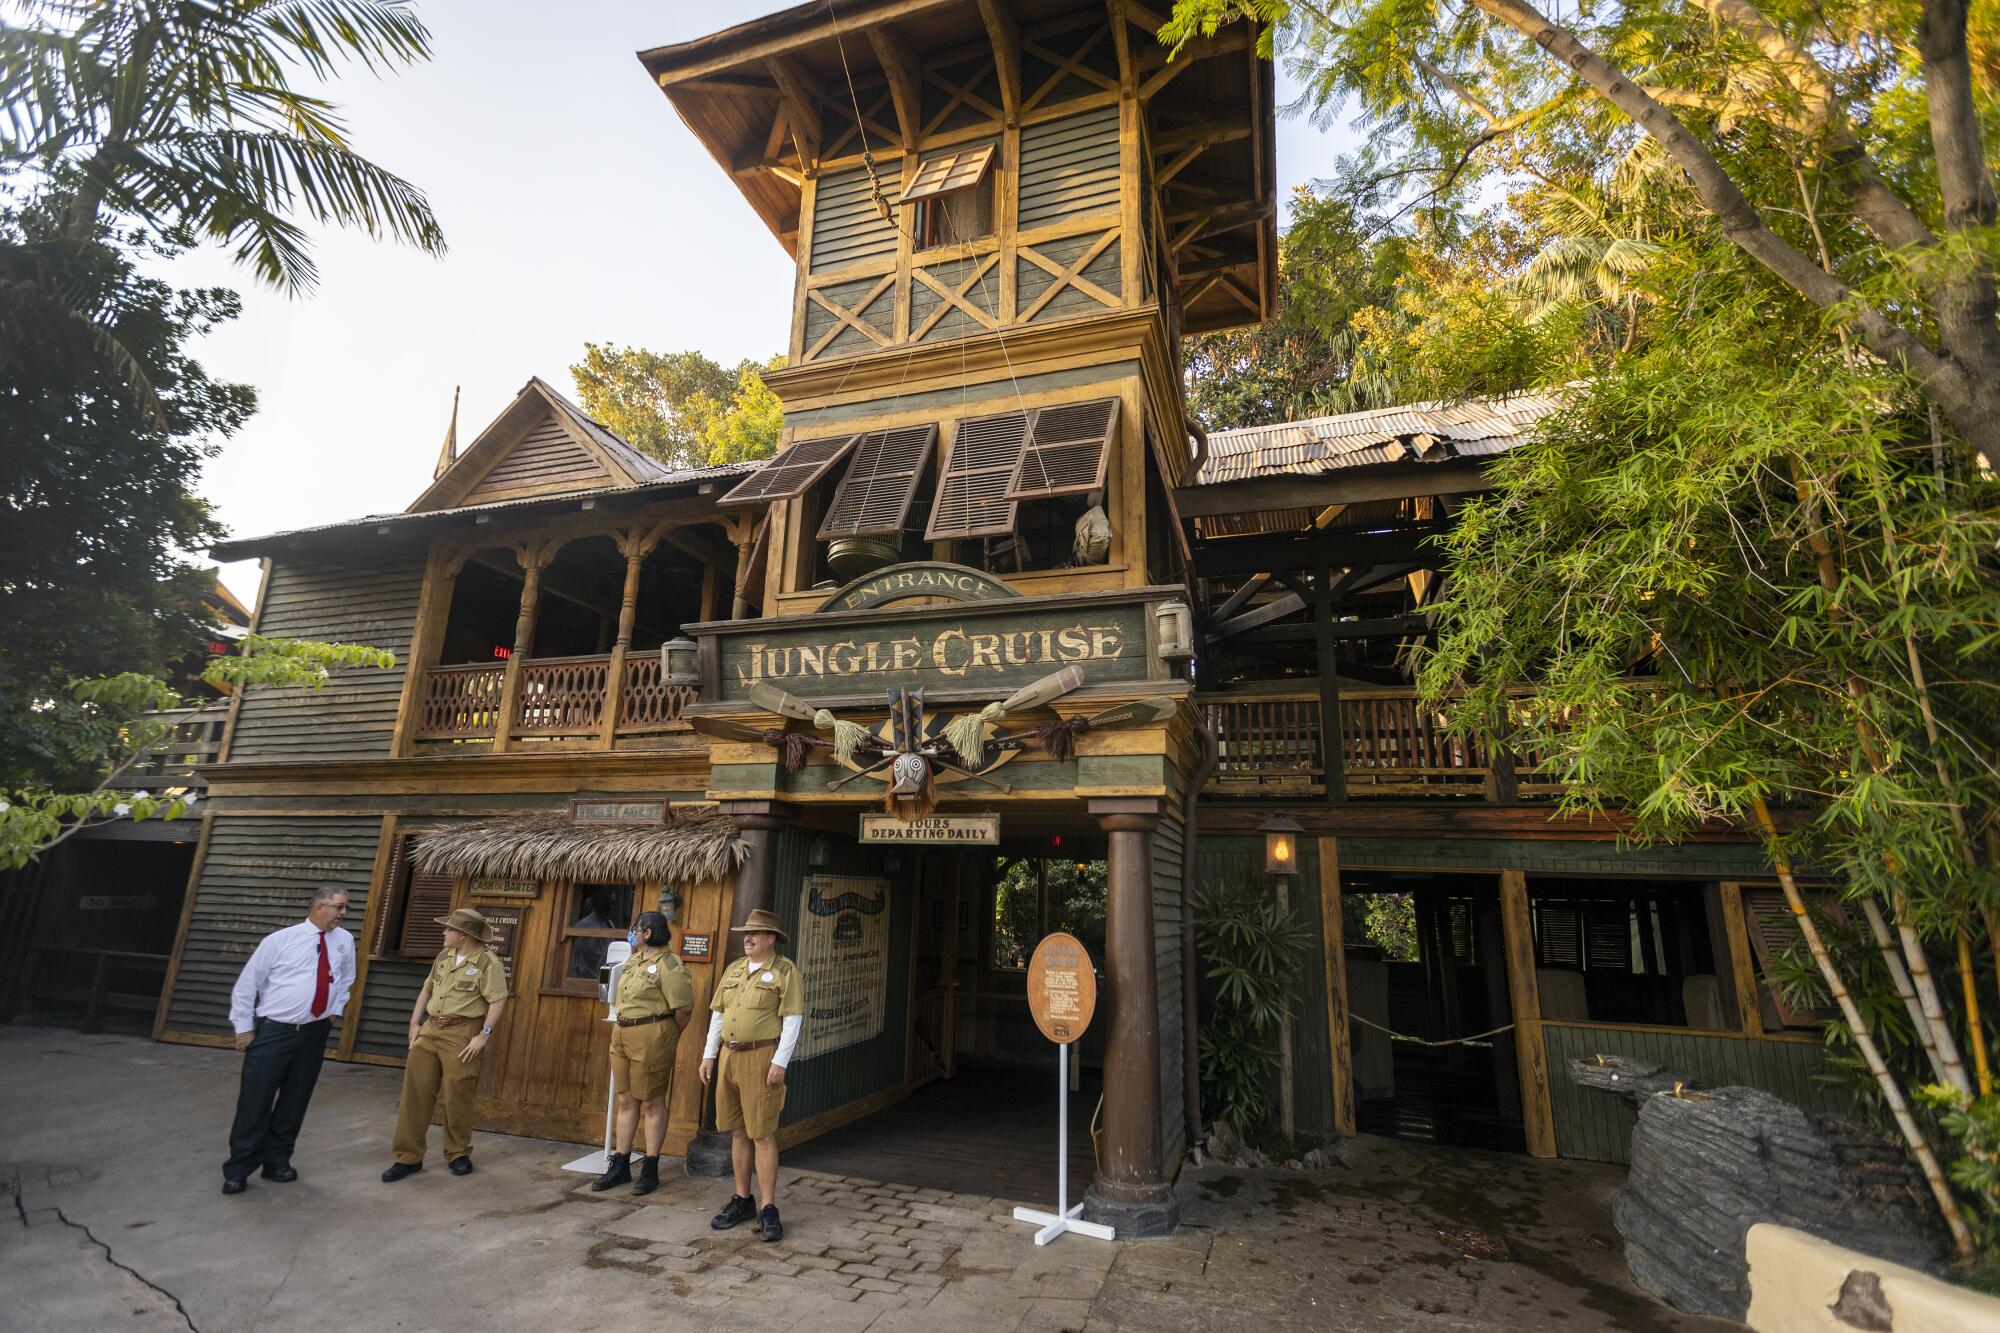 Three people in khaki shorts and shirts and a man in a dress shirt and tie outside a building with a Jungle Cruise sign on it